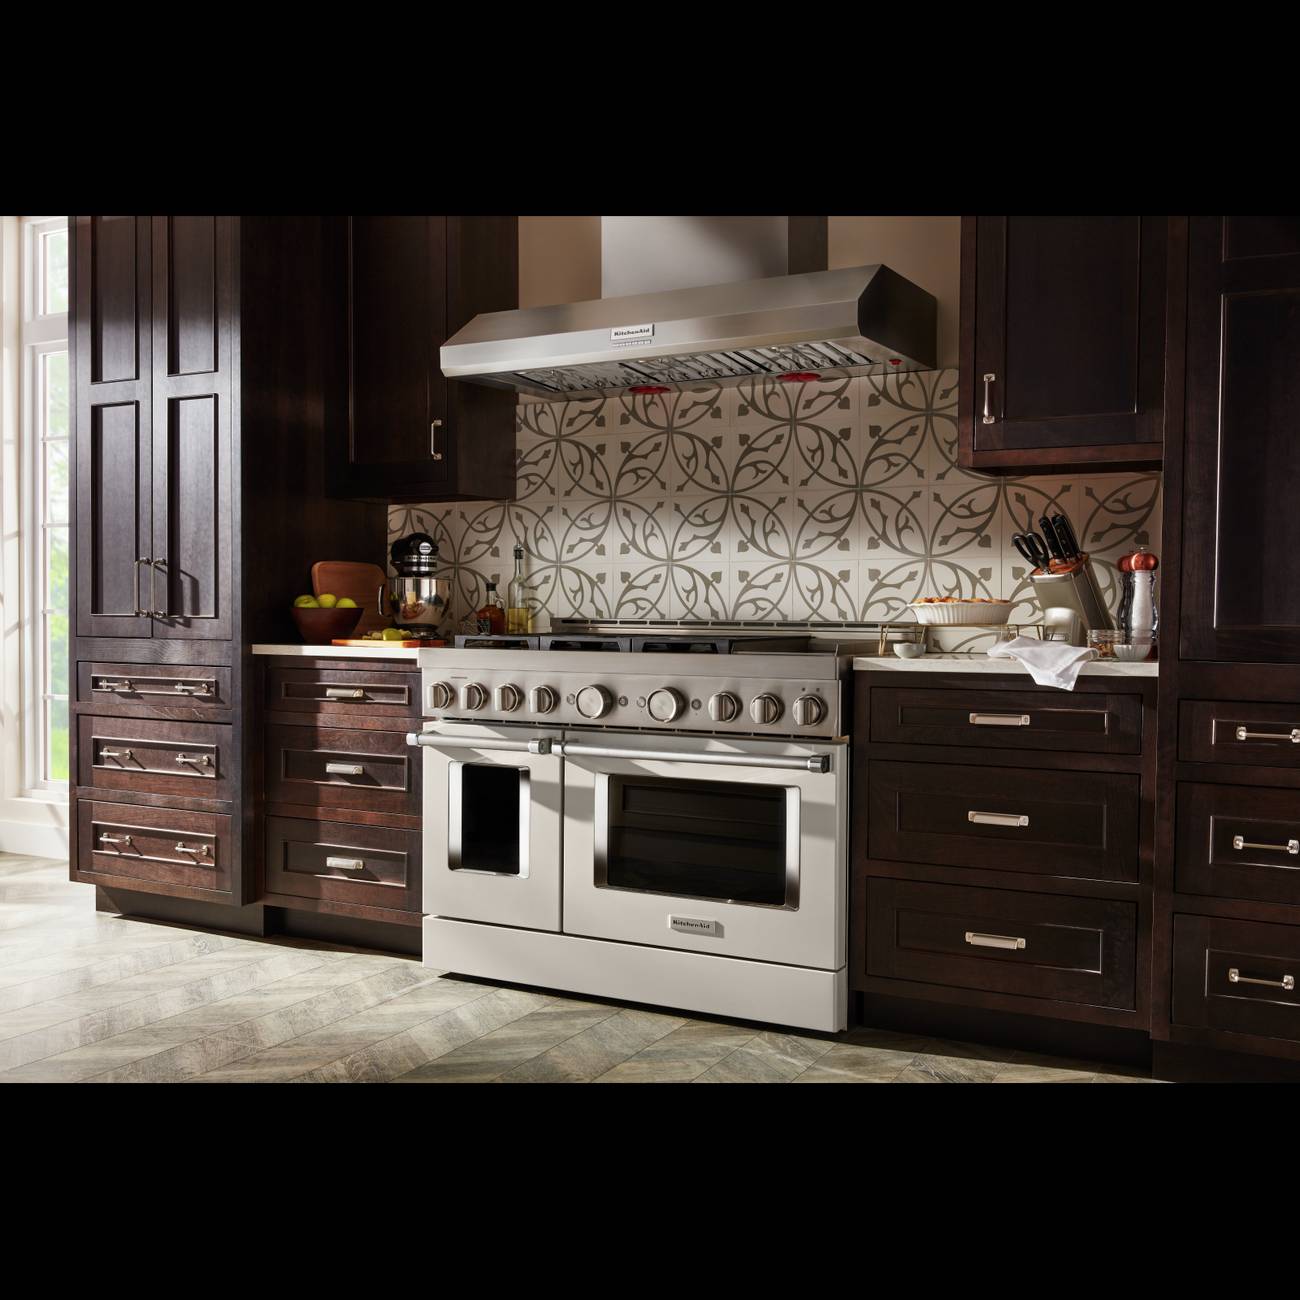 KitchenAid 48 in. GAS Commercial Cooktop with 6-Burners and